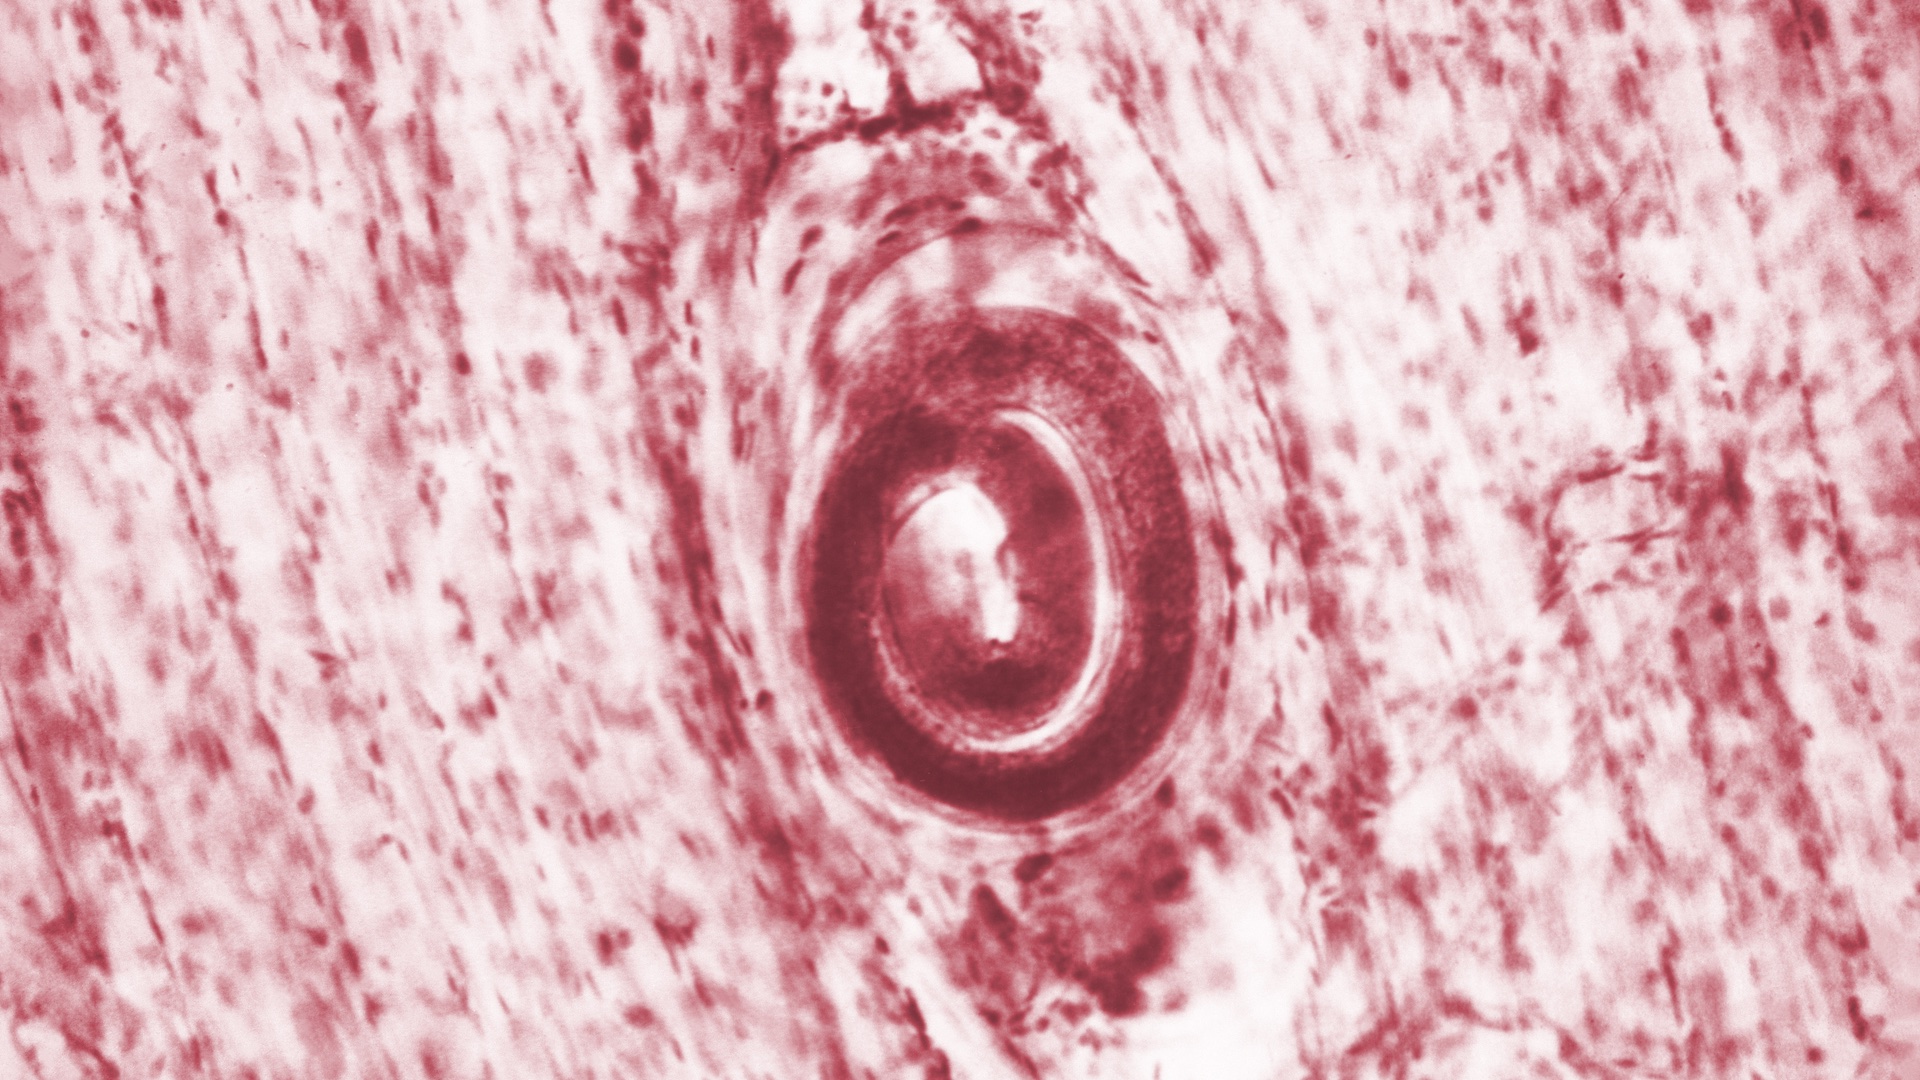 a photomicrograph depicting a Trichinella spiralis cyst, that was embedded in a muscle tissue specimen